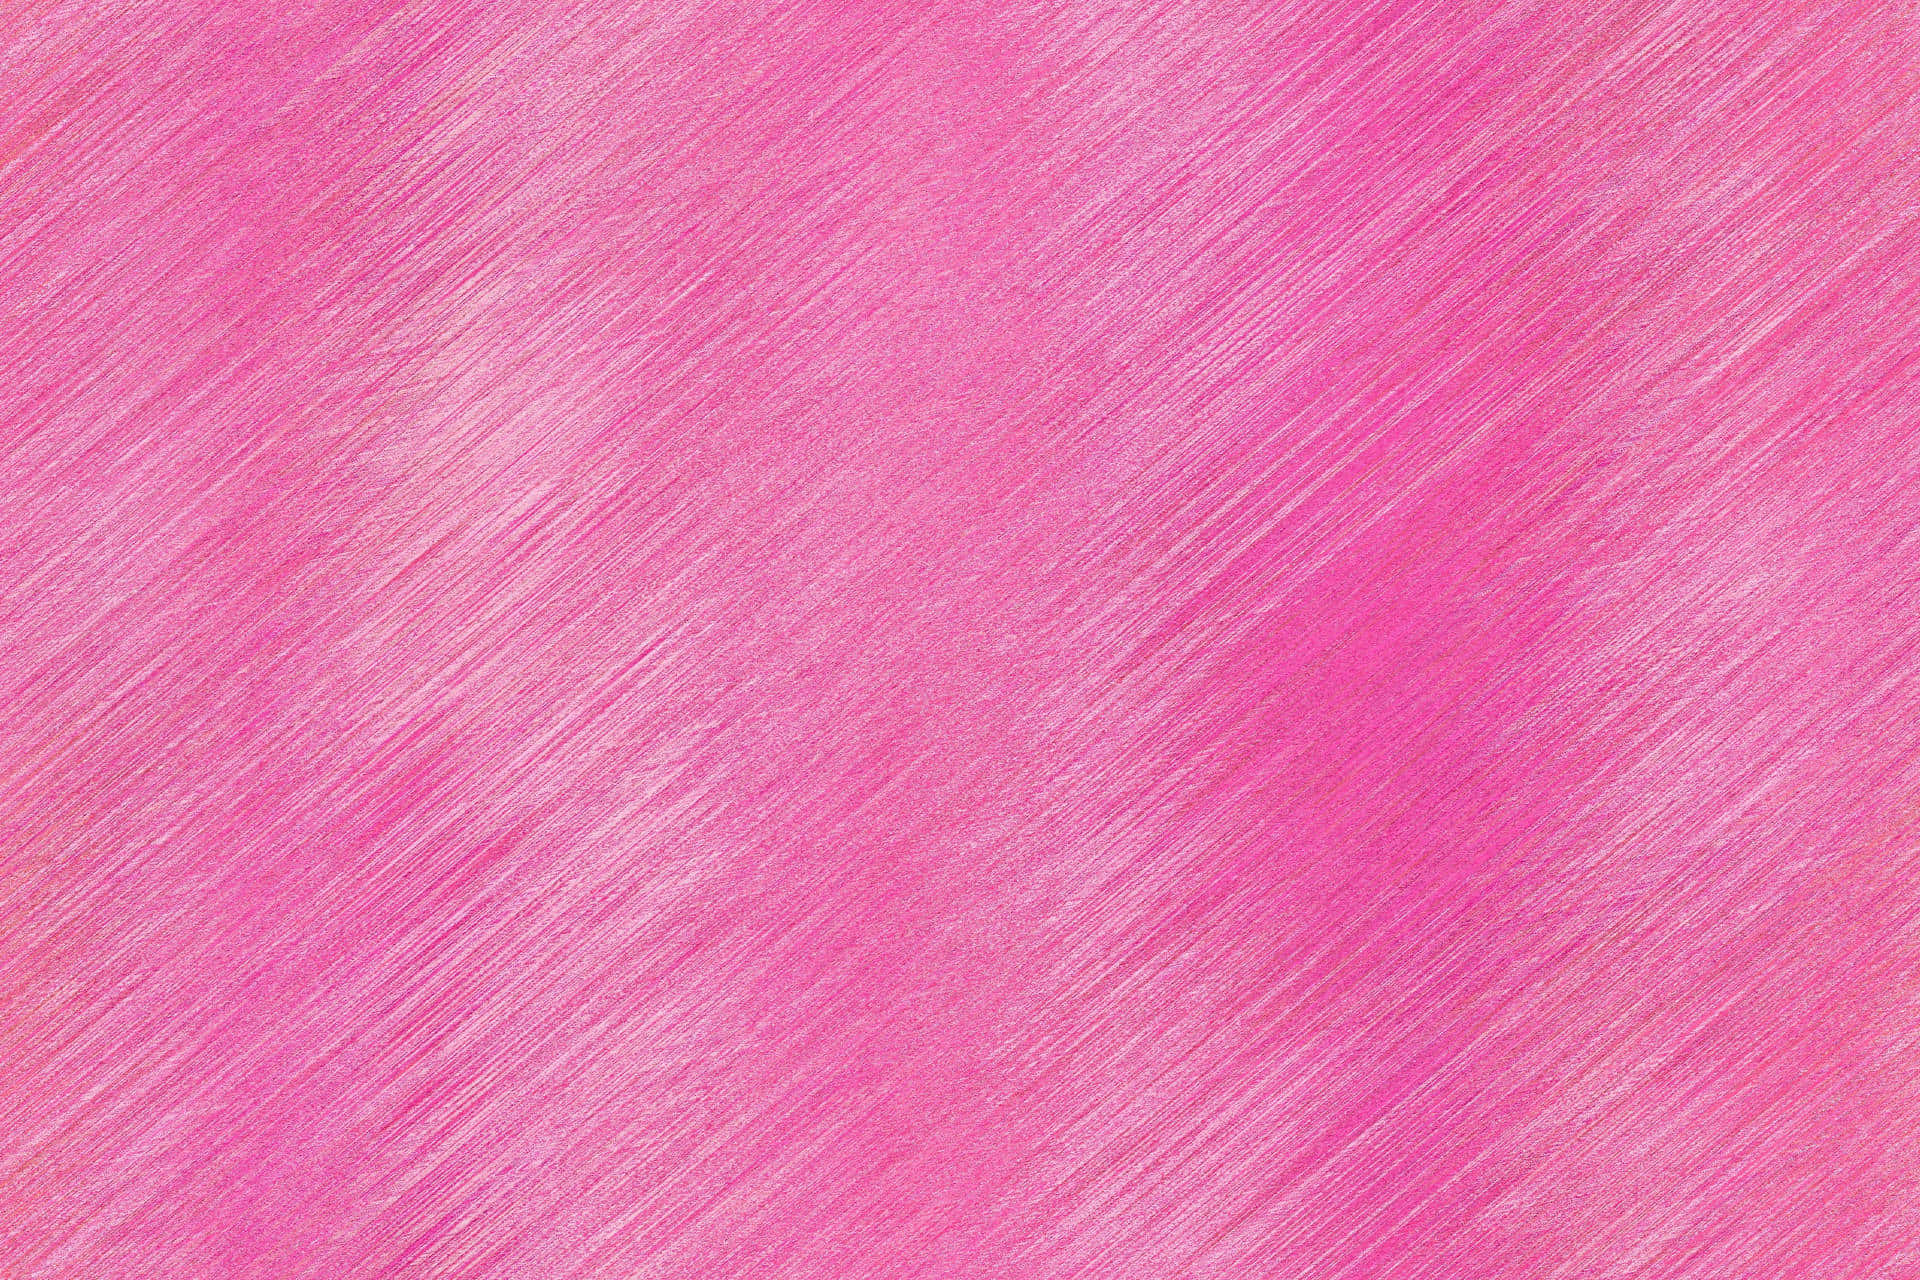 A Pink Paint Brush Texture